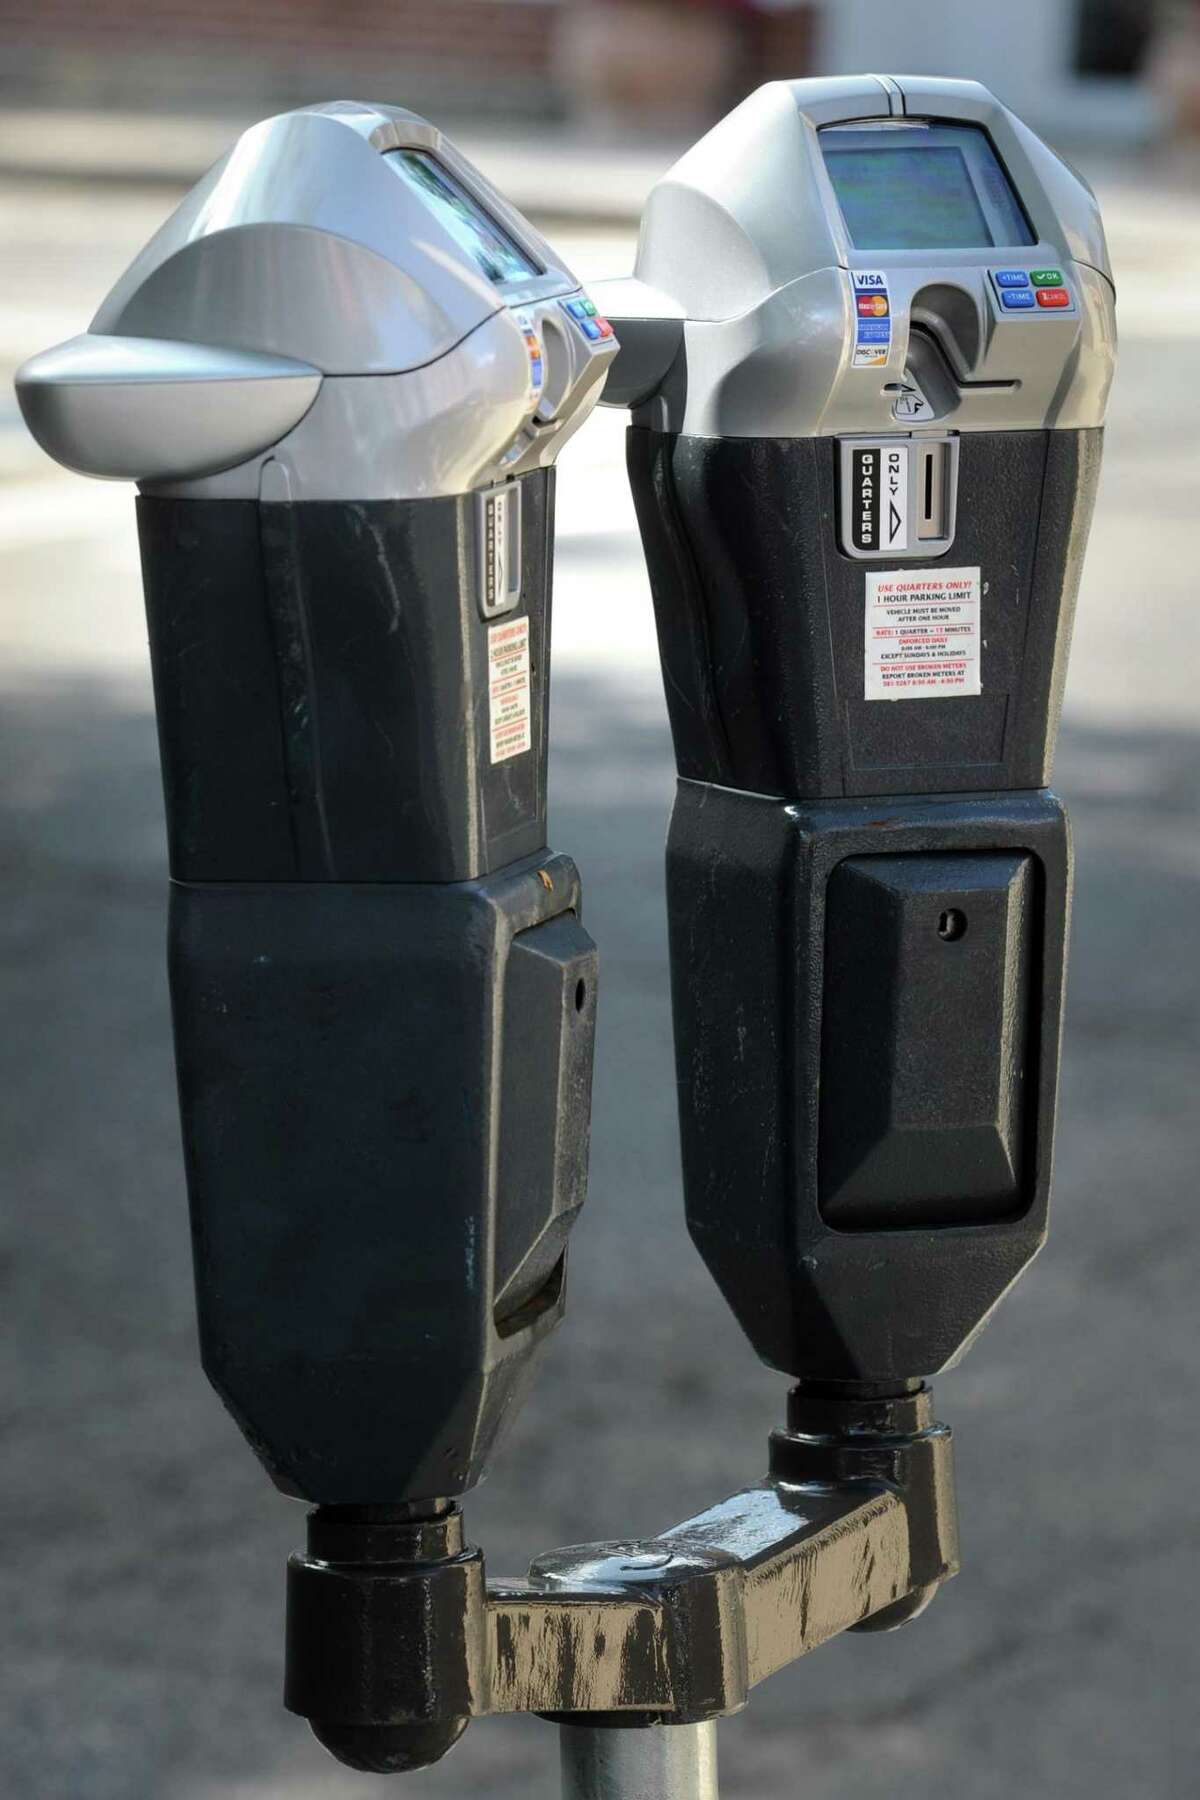 The City of Bridgeport began installing replacement parking meters on downtown streets last year.